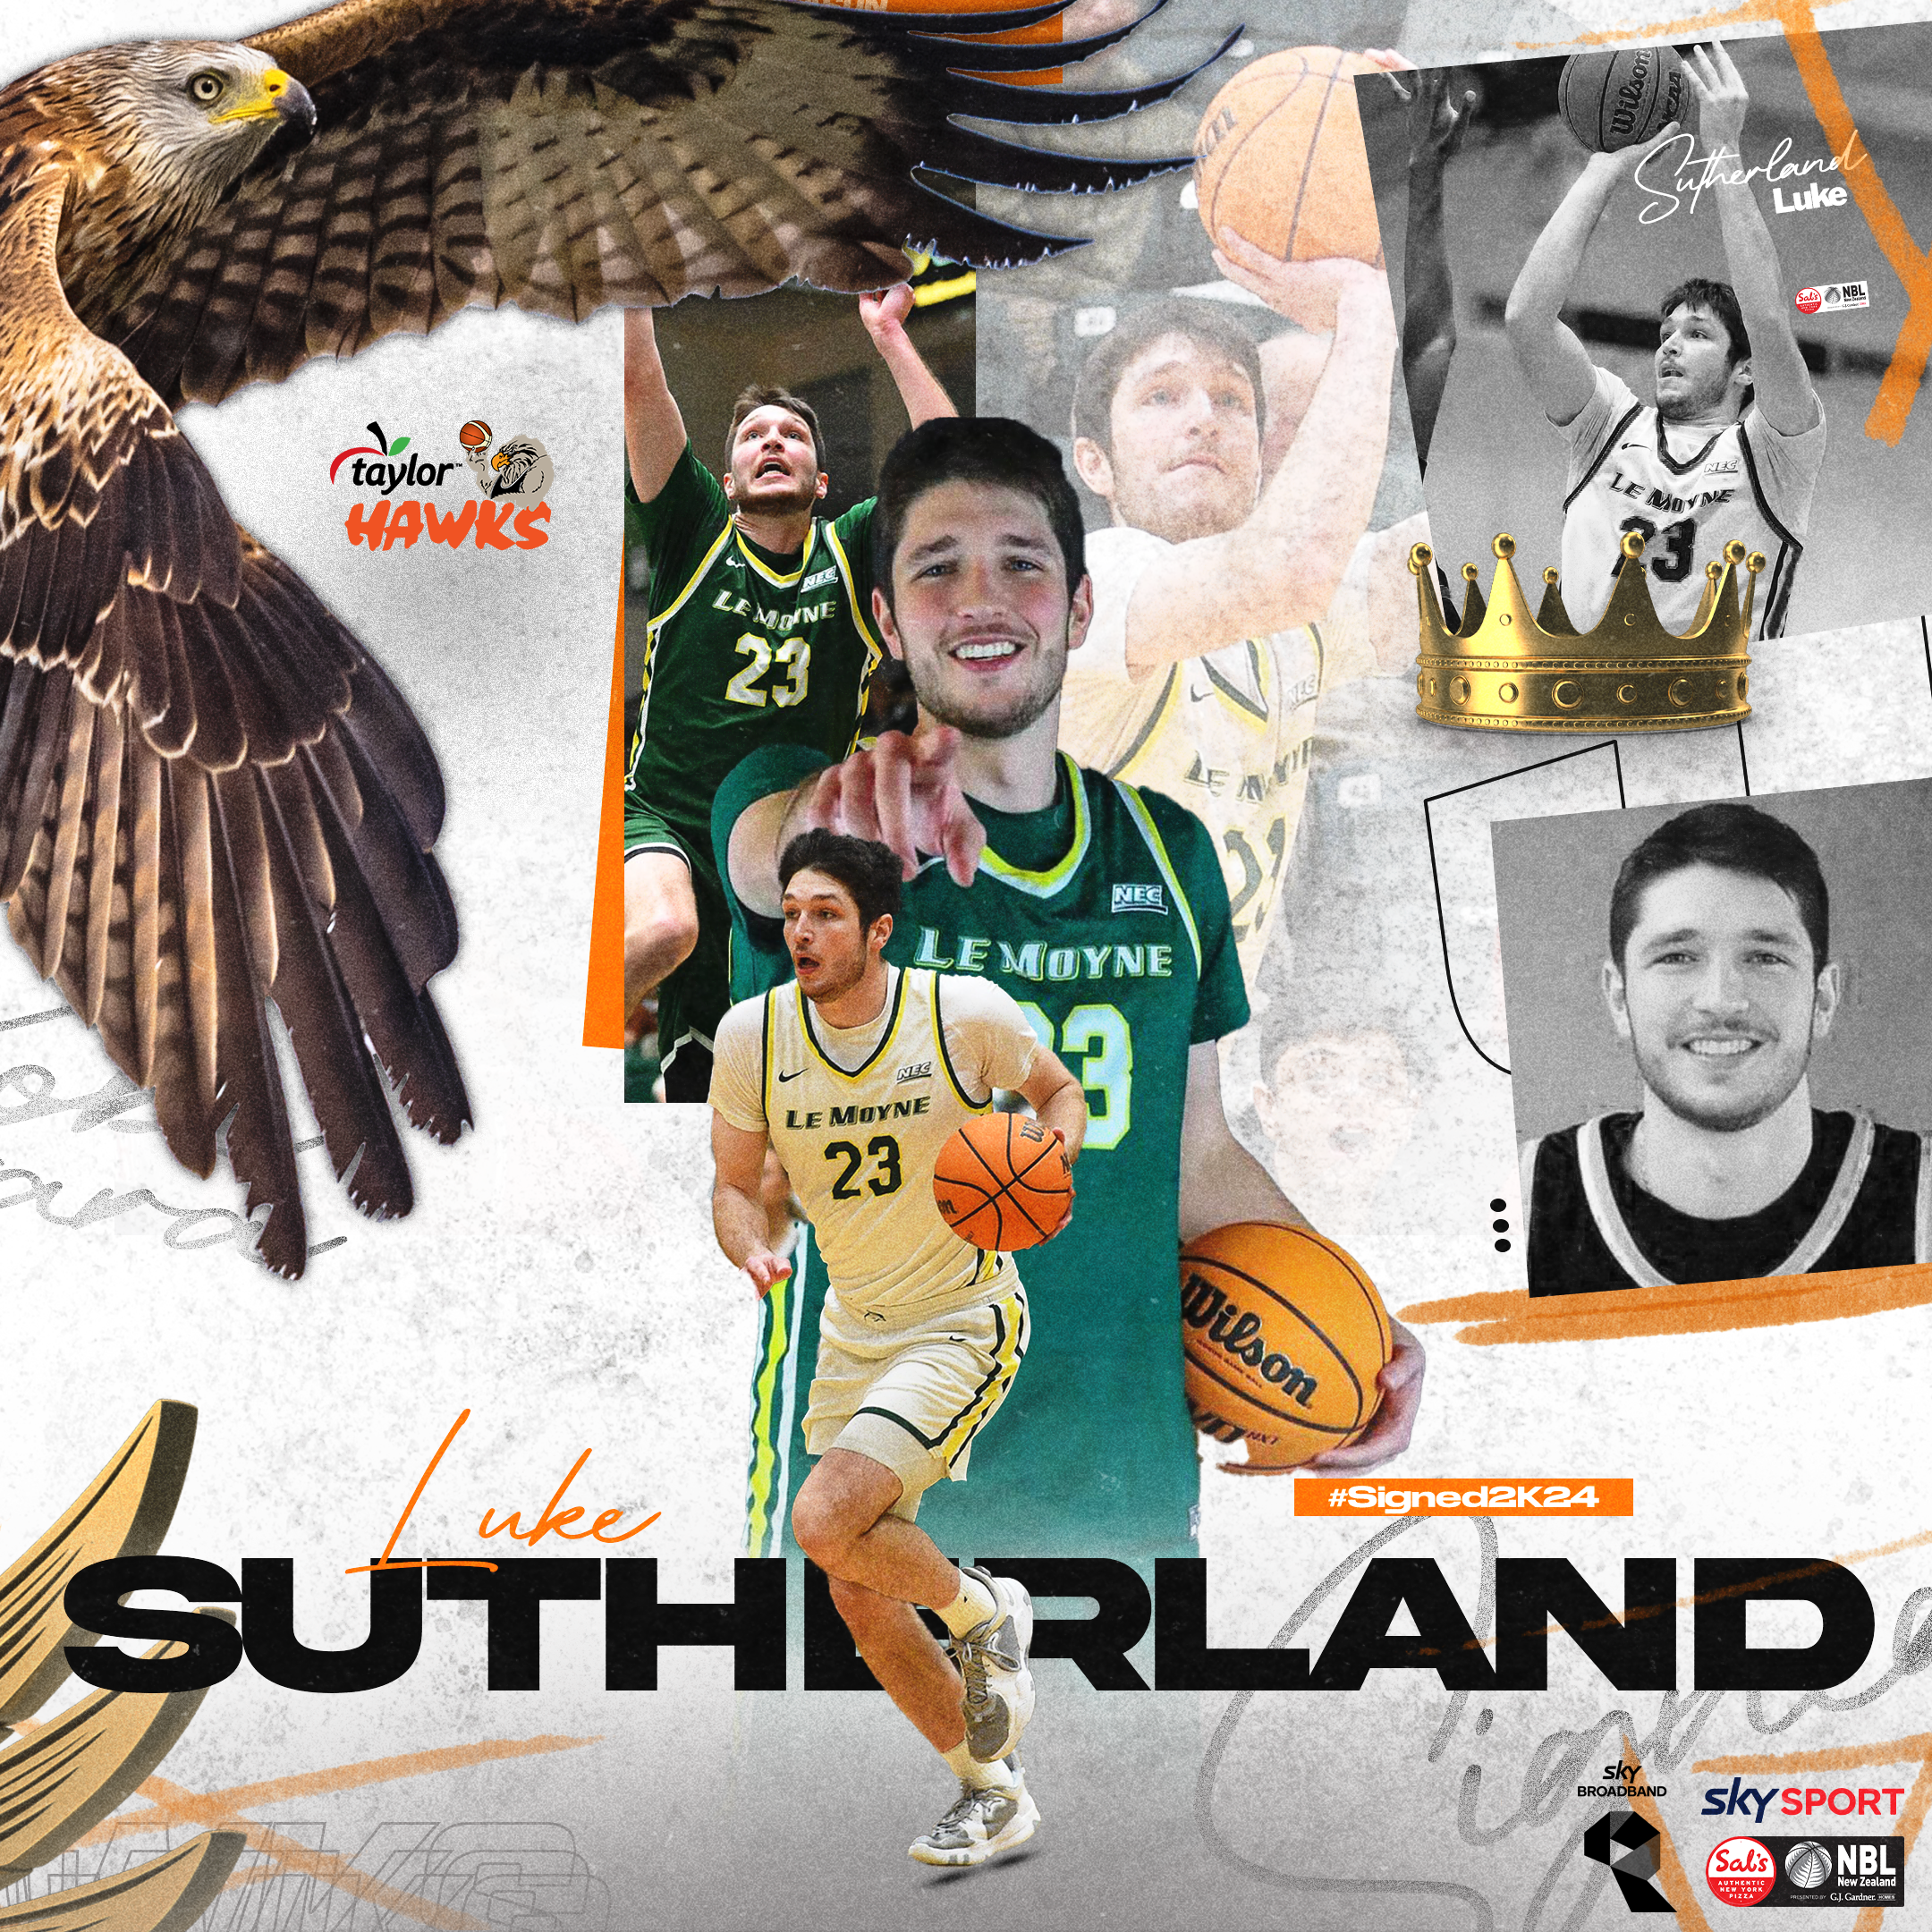 Sutherland, final piece to the puzzle